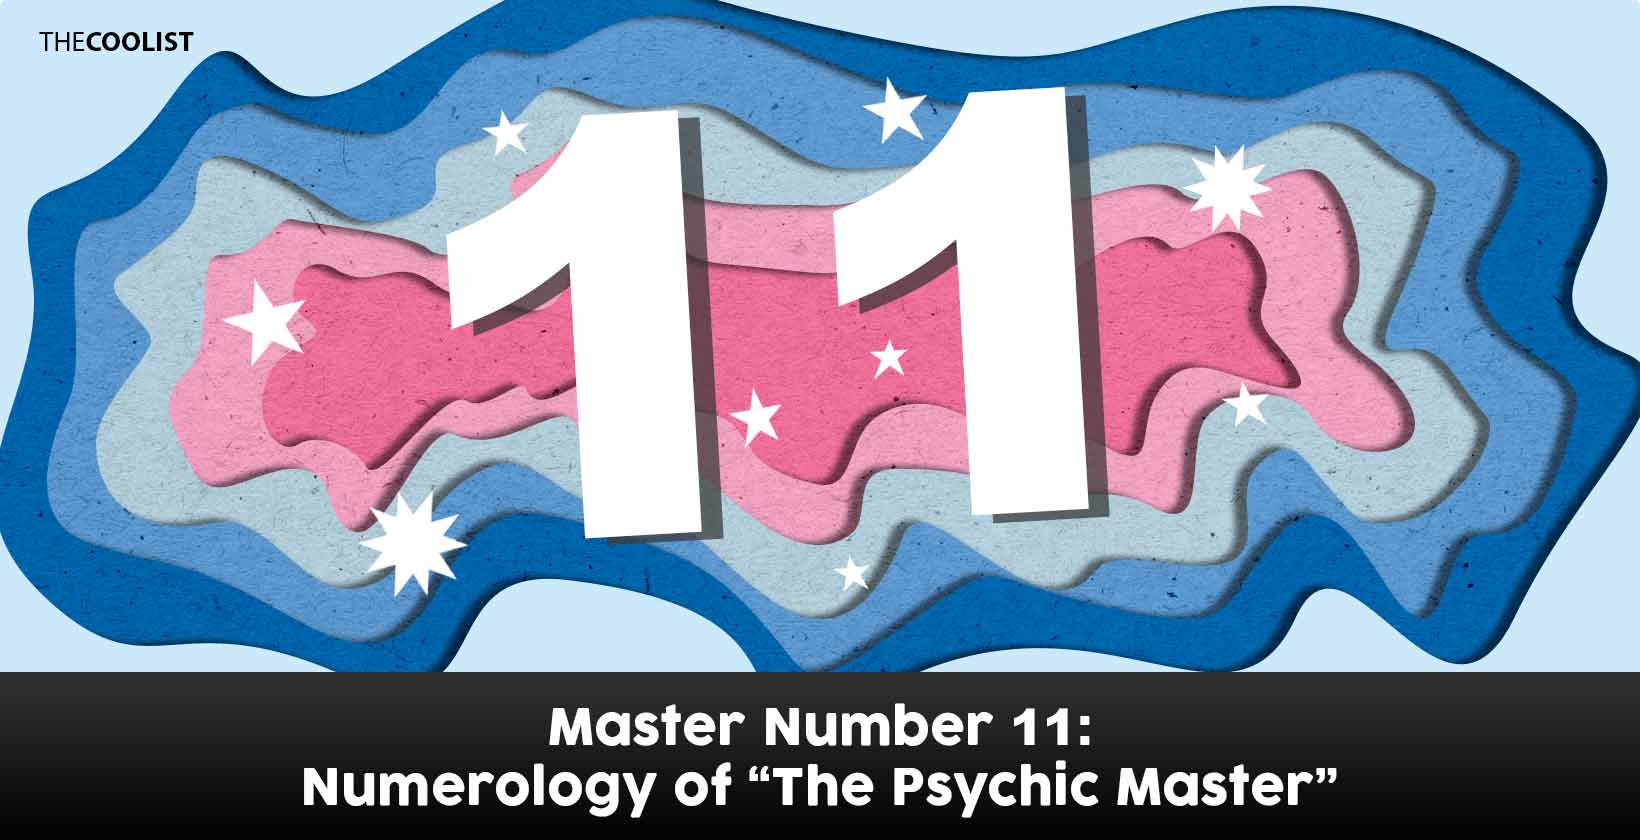 Master Number 11: Numerology of "The Psychic Master"